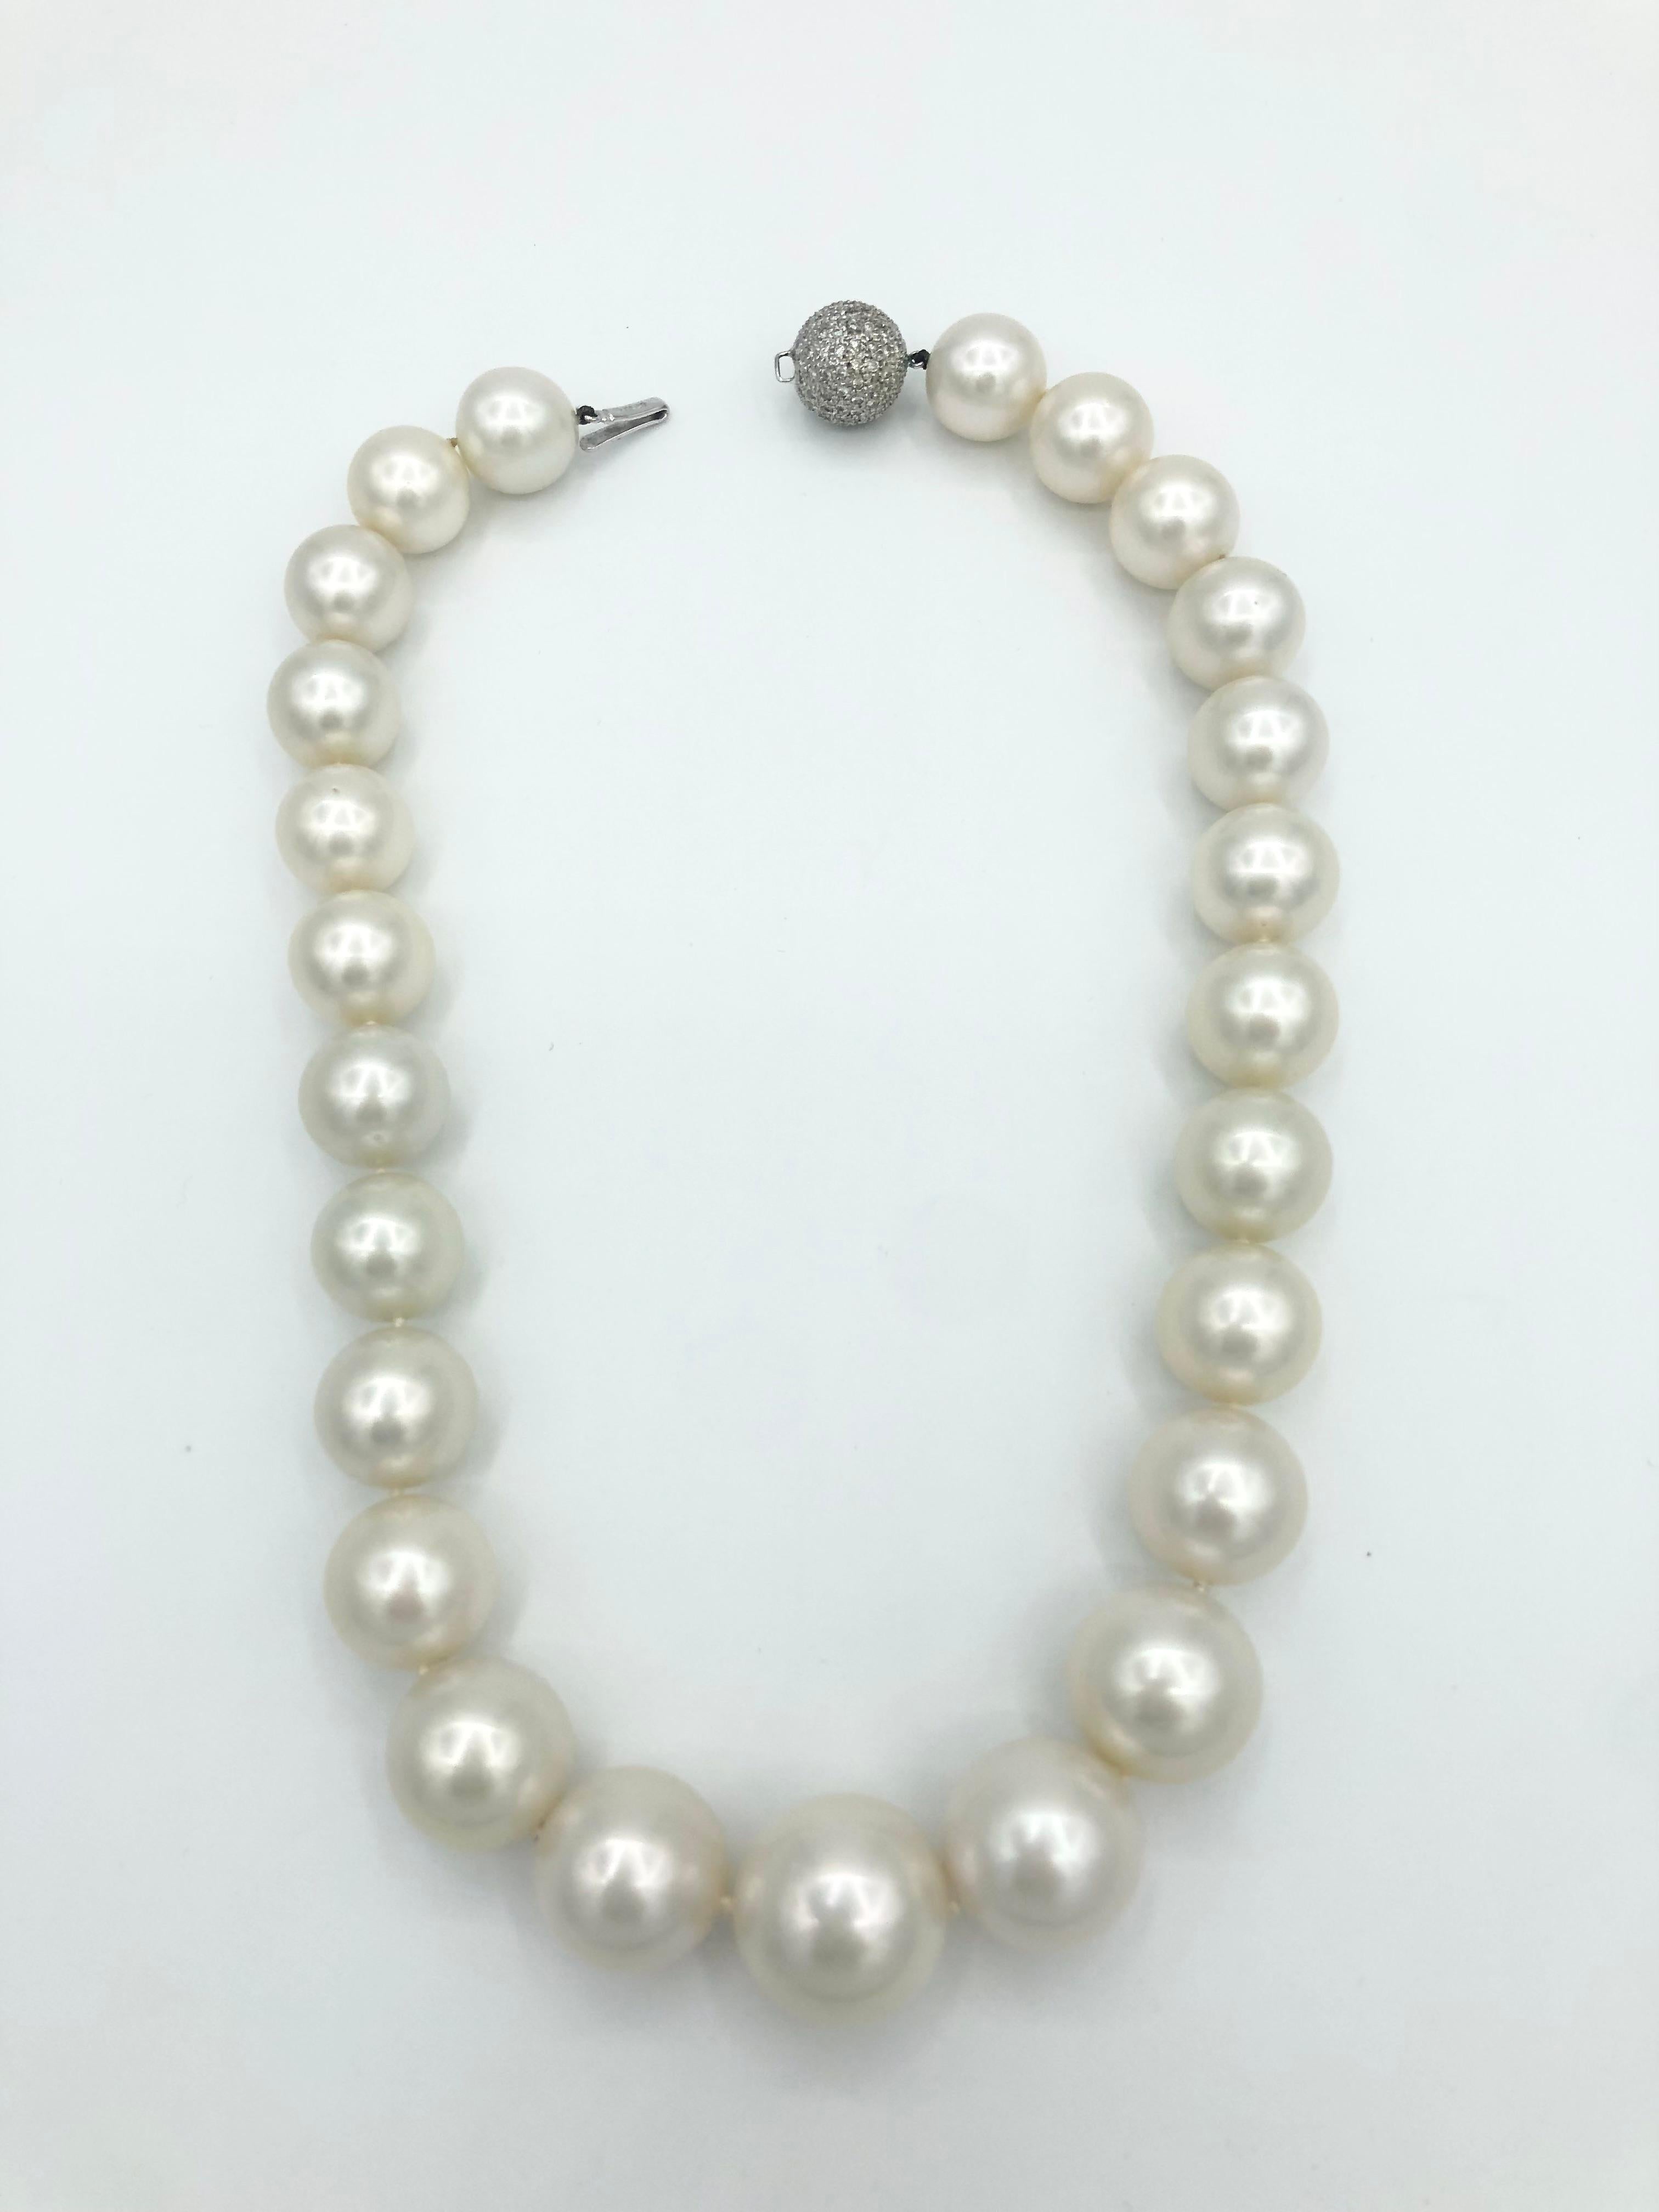 Round Cut Rare 15-20mm South Sea Pearl Necklace For Sale